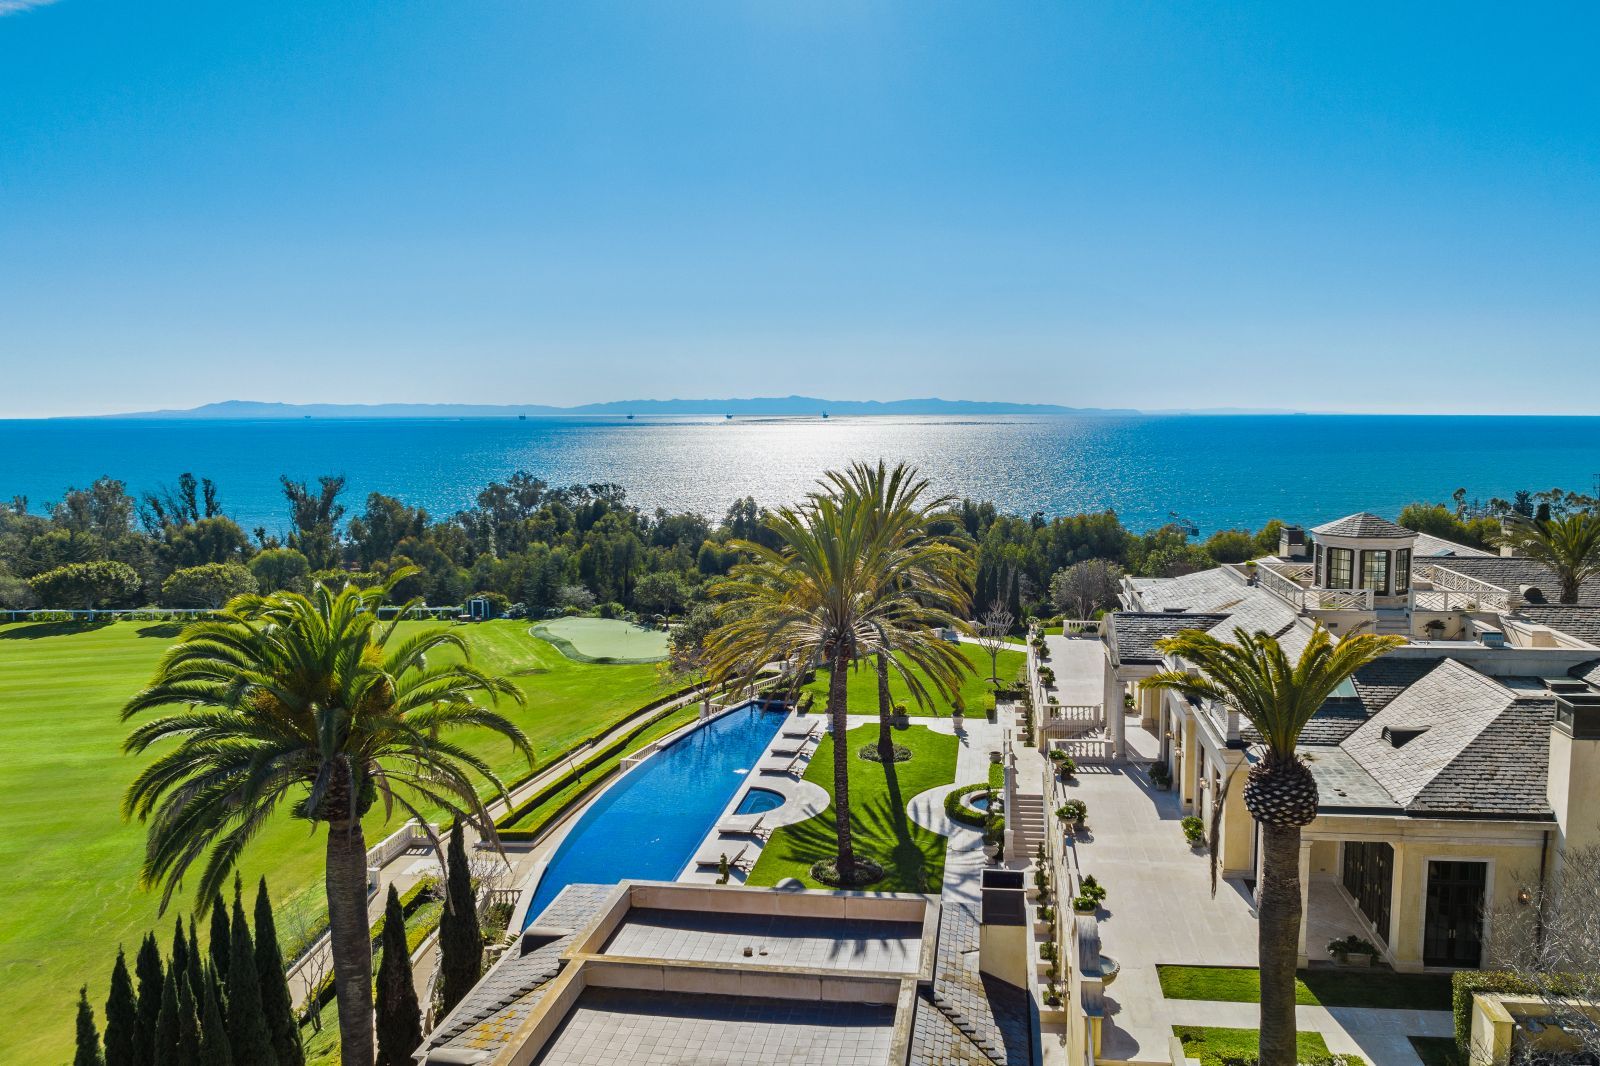 A portion of a Mediterranean mansion, its expansive pool and lawn, and palm trees in the foreground, with the sparkling blue ocean and blue sky on the horizon in the background